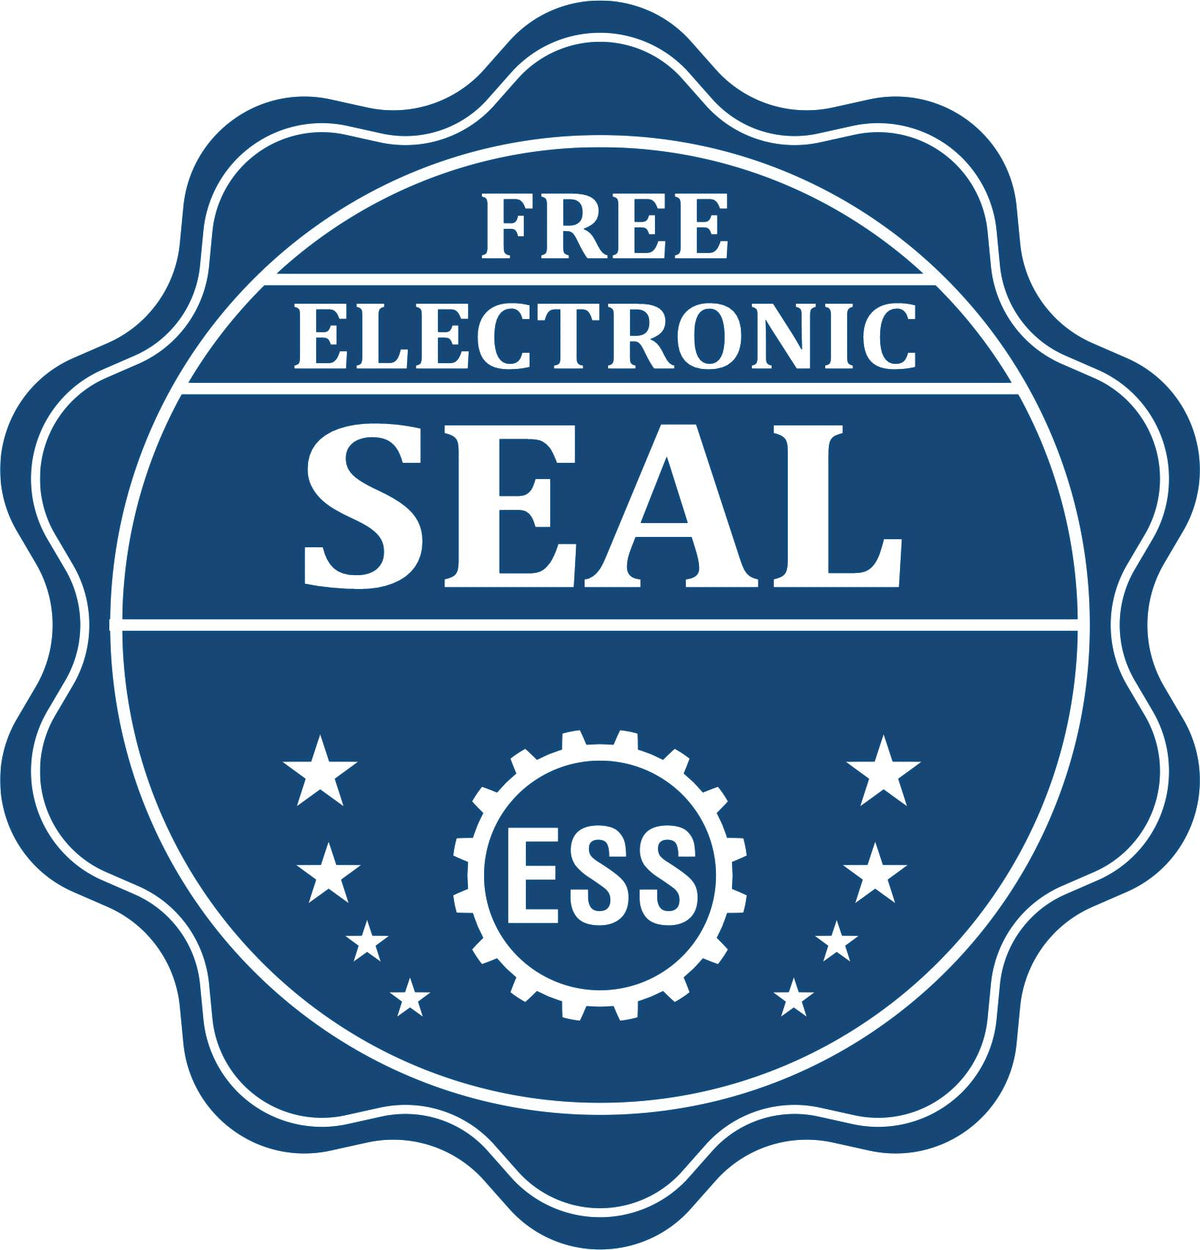 A badge showing a free electronic seal for the Premium MaxLight Pre-Inked Illinois Landscape Architectural Stamp with stars and the ESS gear on the emblem.